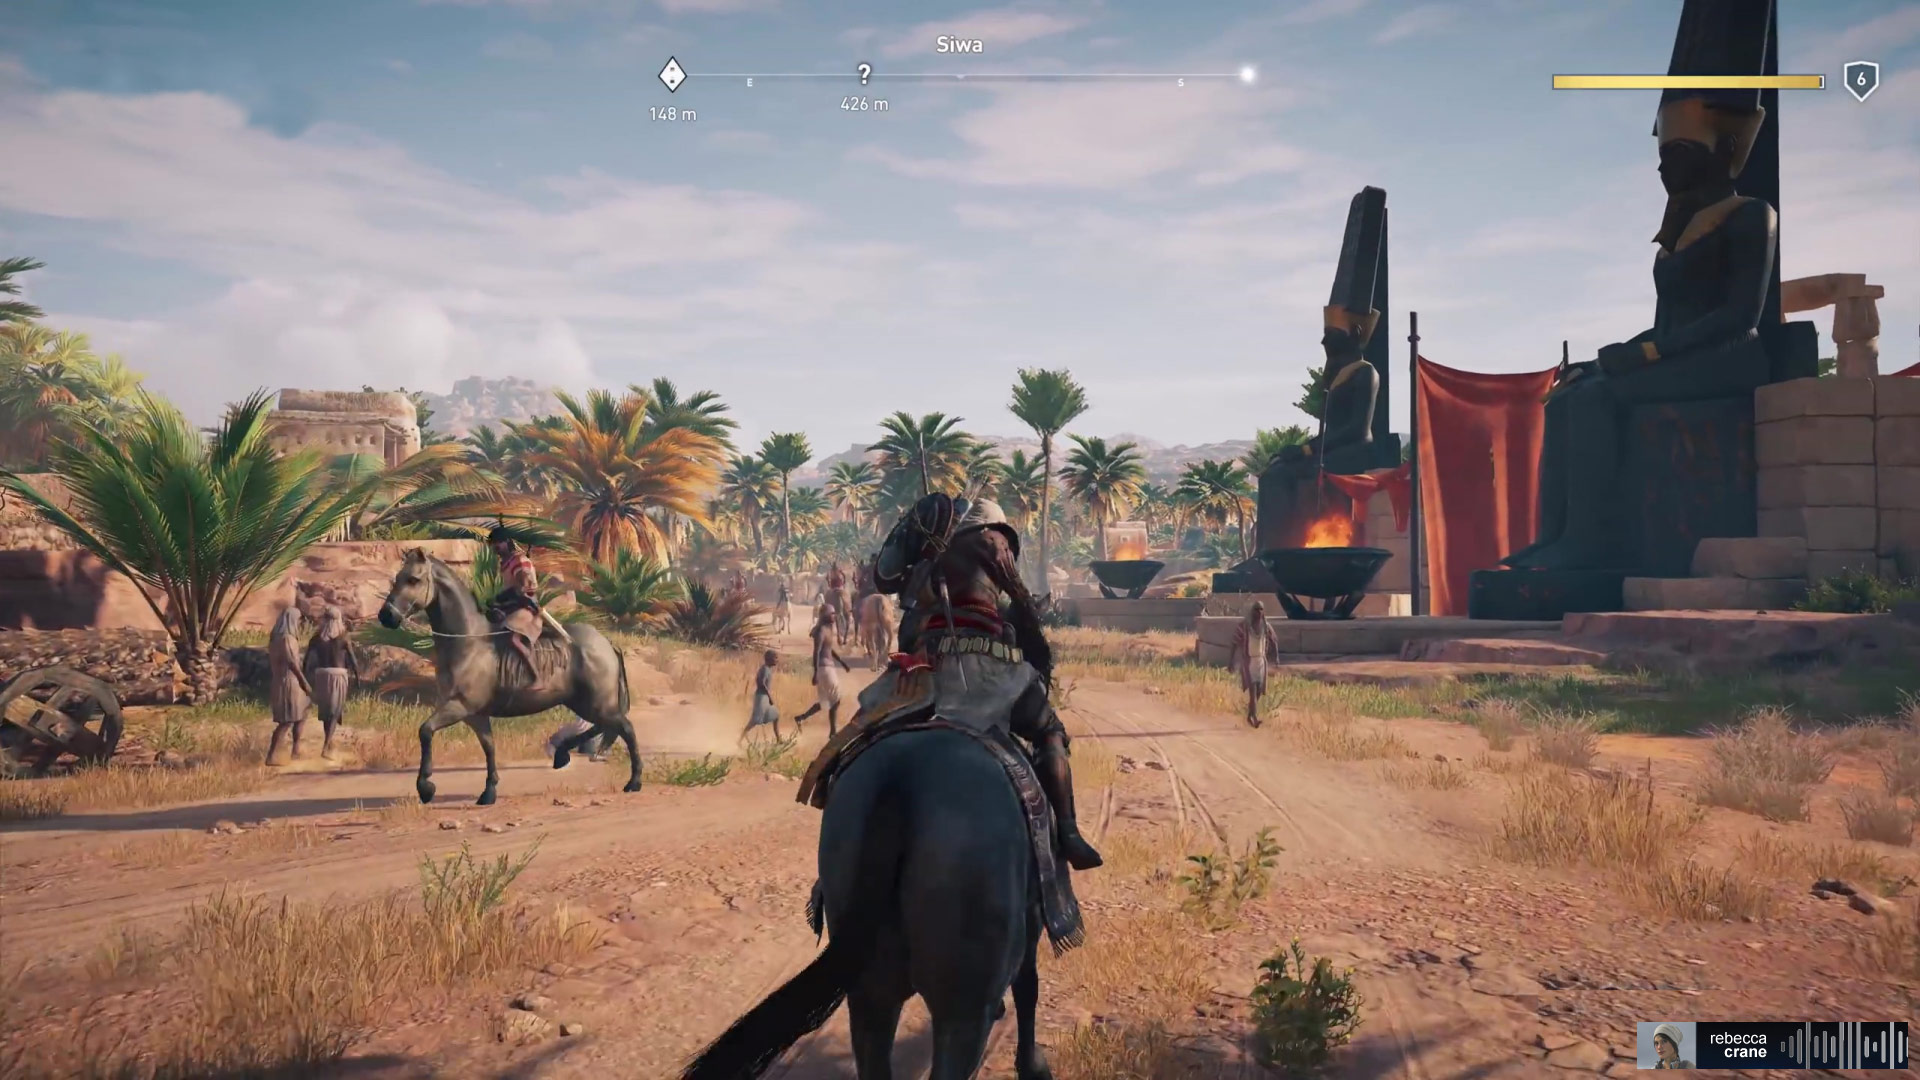 Assassin's Creed Origins Metacritic Flooded With Fake Positive